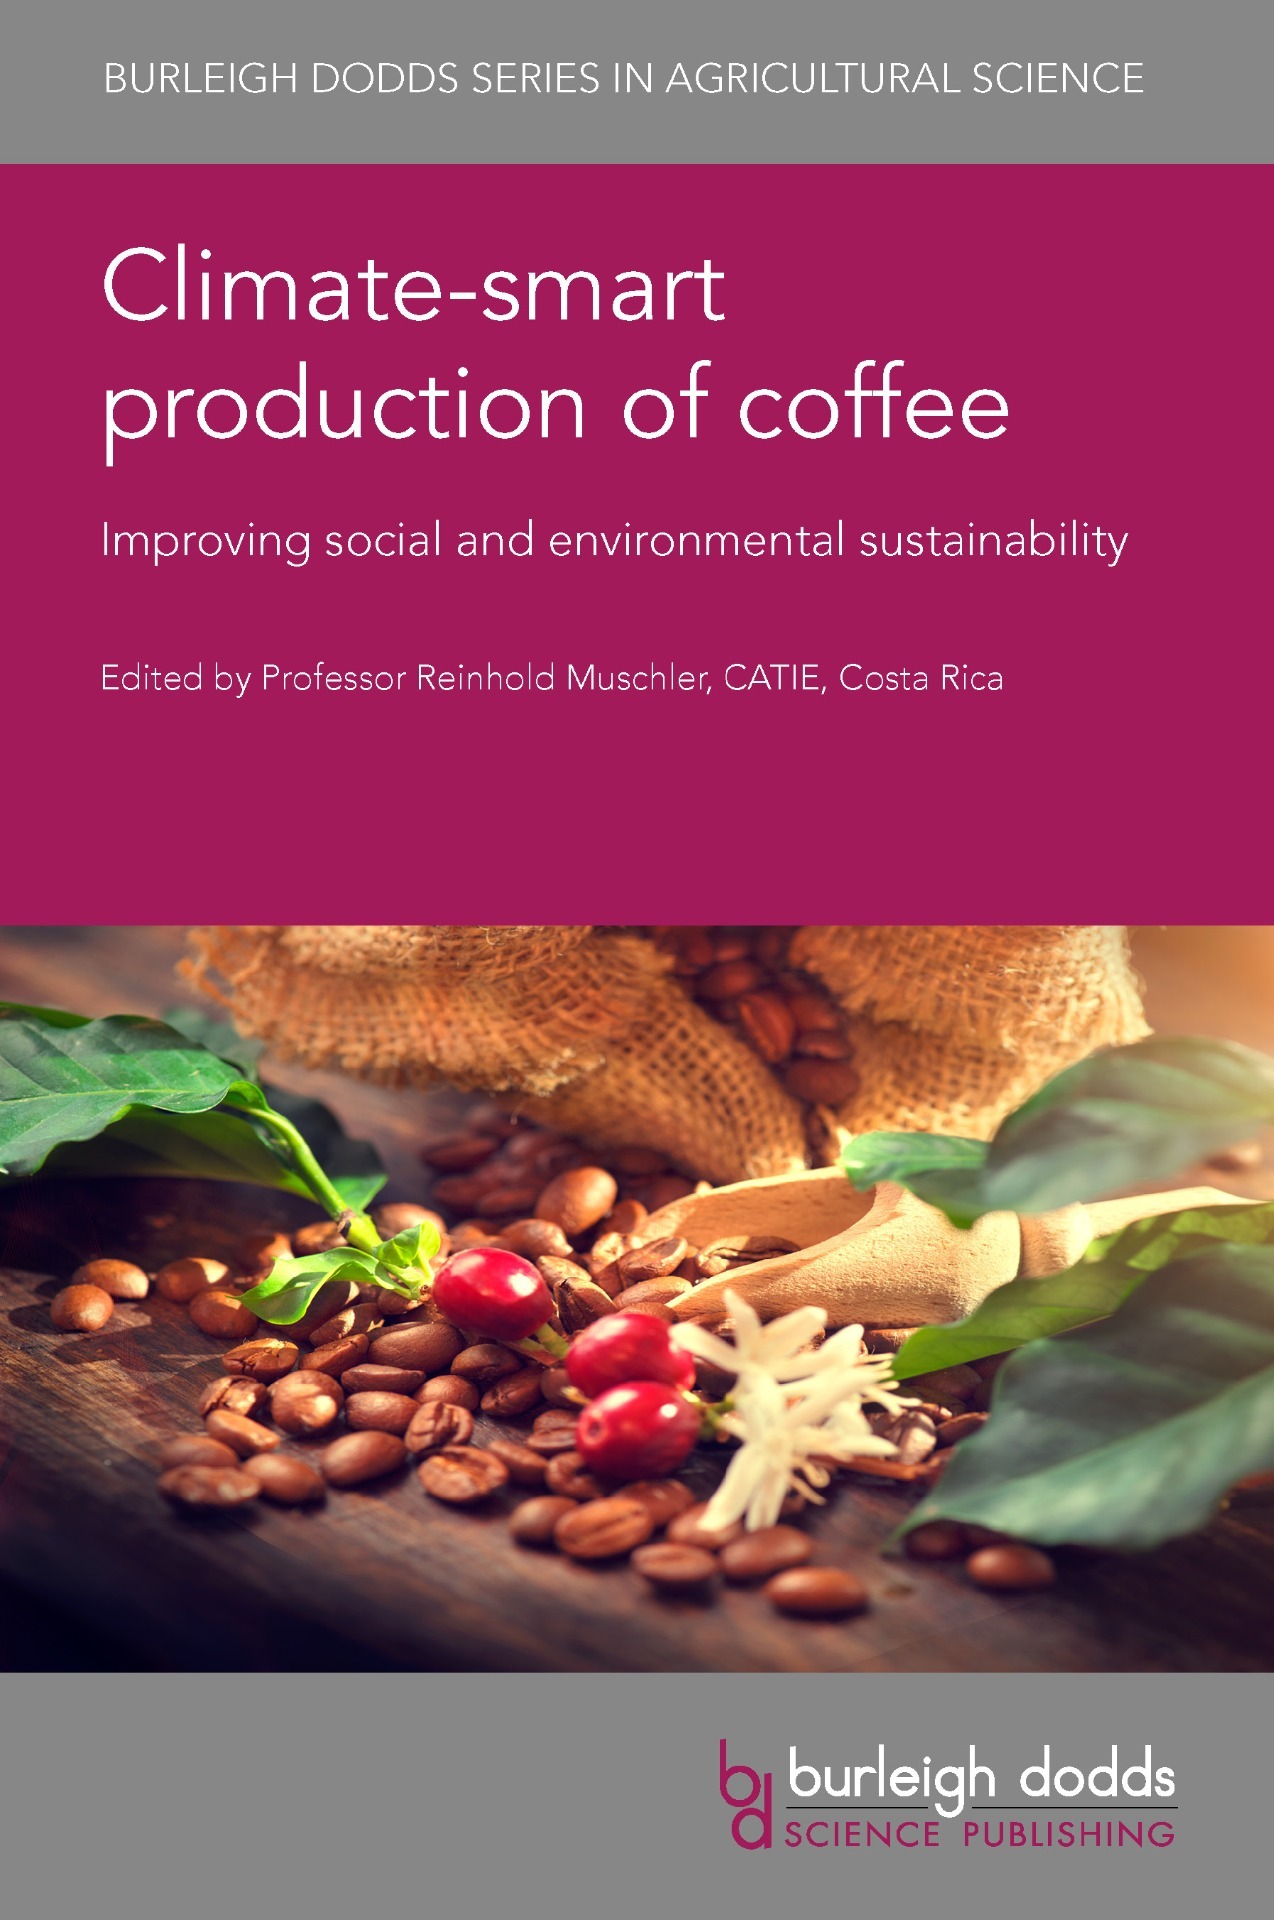 Climate-smart production of coffee - Improving social and environmental sustainability